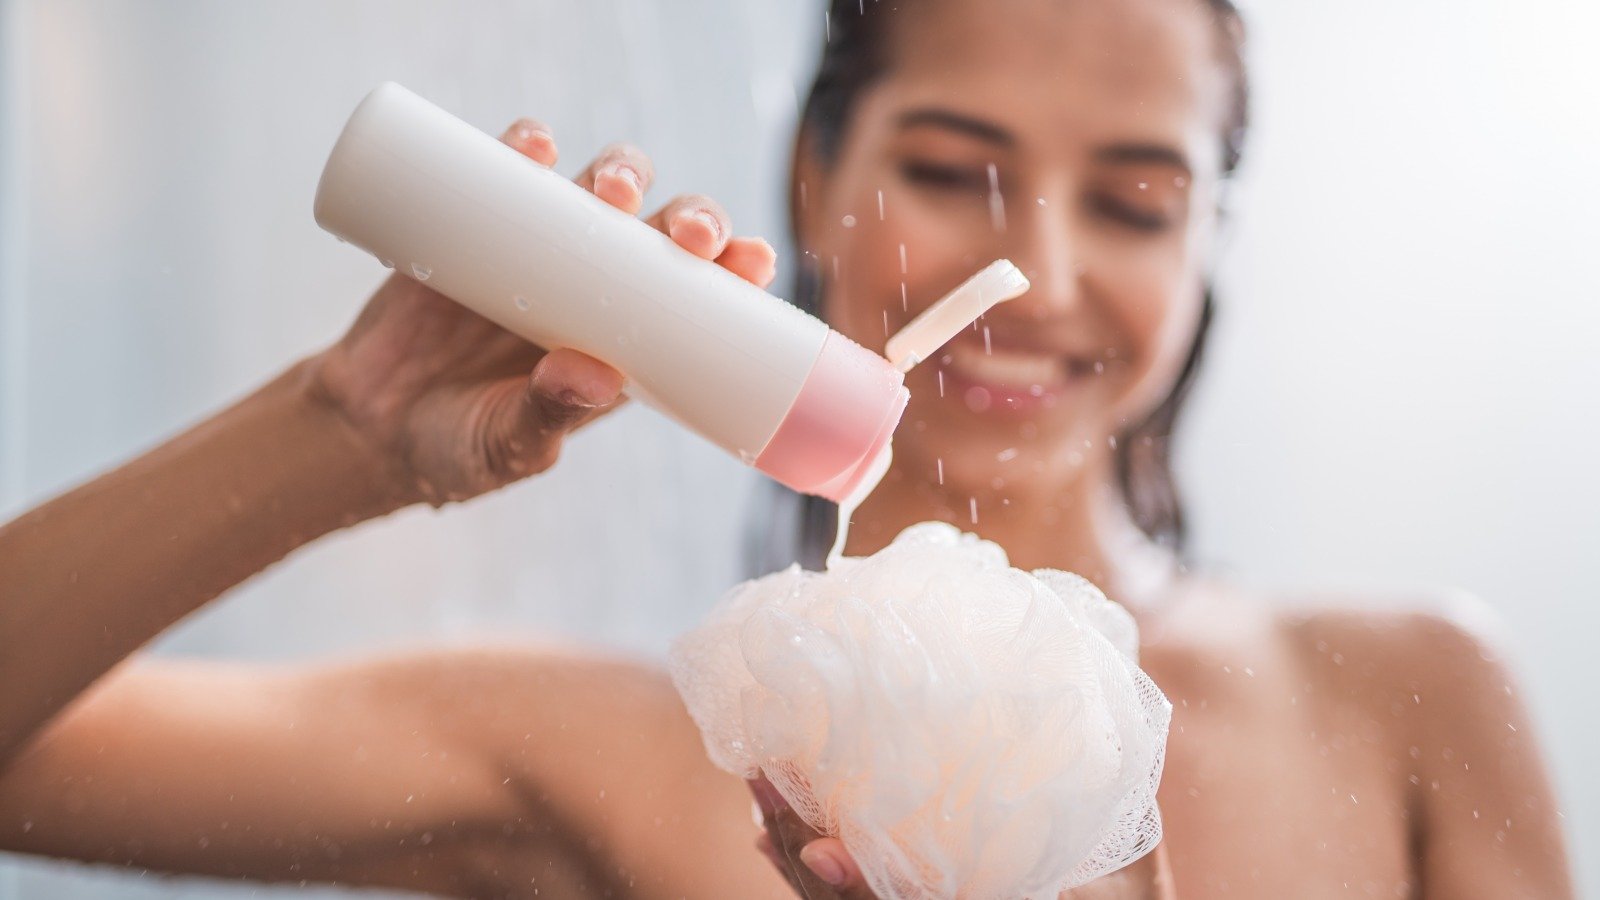 The Only 3 Body Parts You Need To Wash Every Day, According To Science